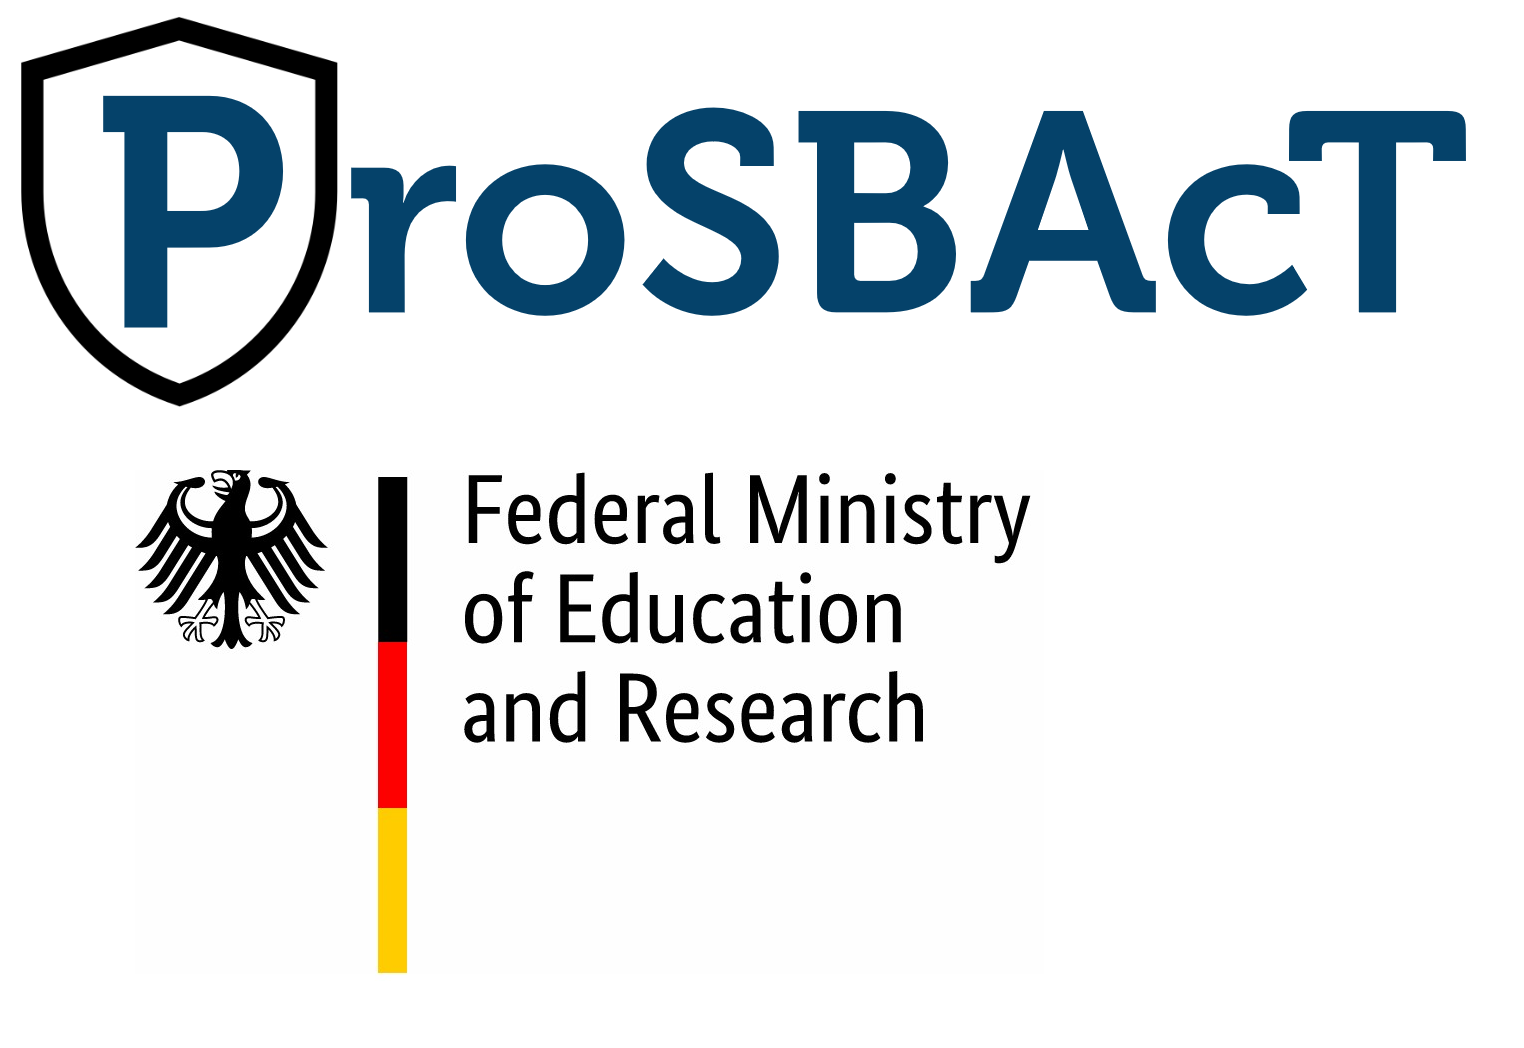 The picture shows the ProSBAcT logo and below it the logo of the Federal Ministry of Education and Research.